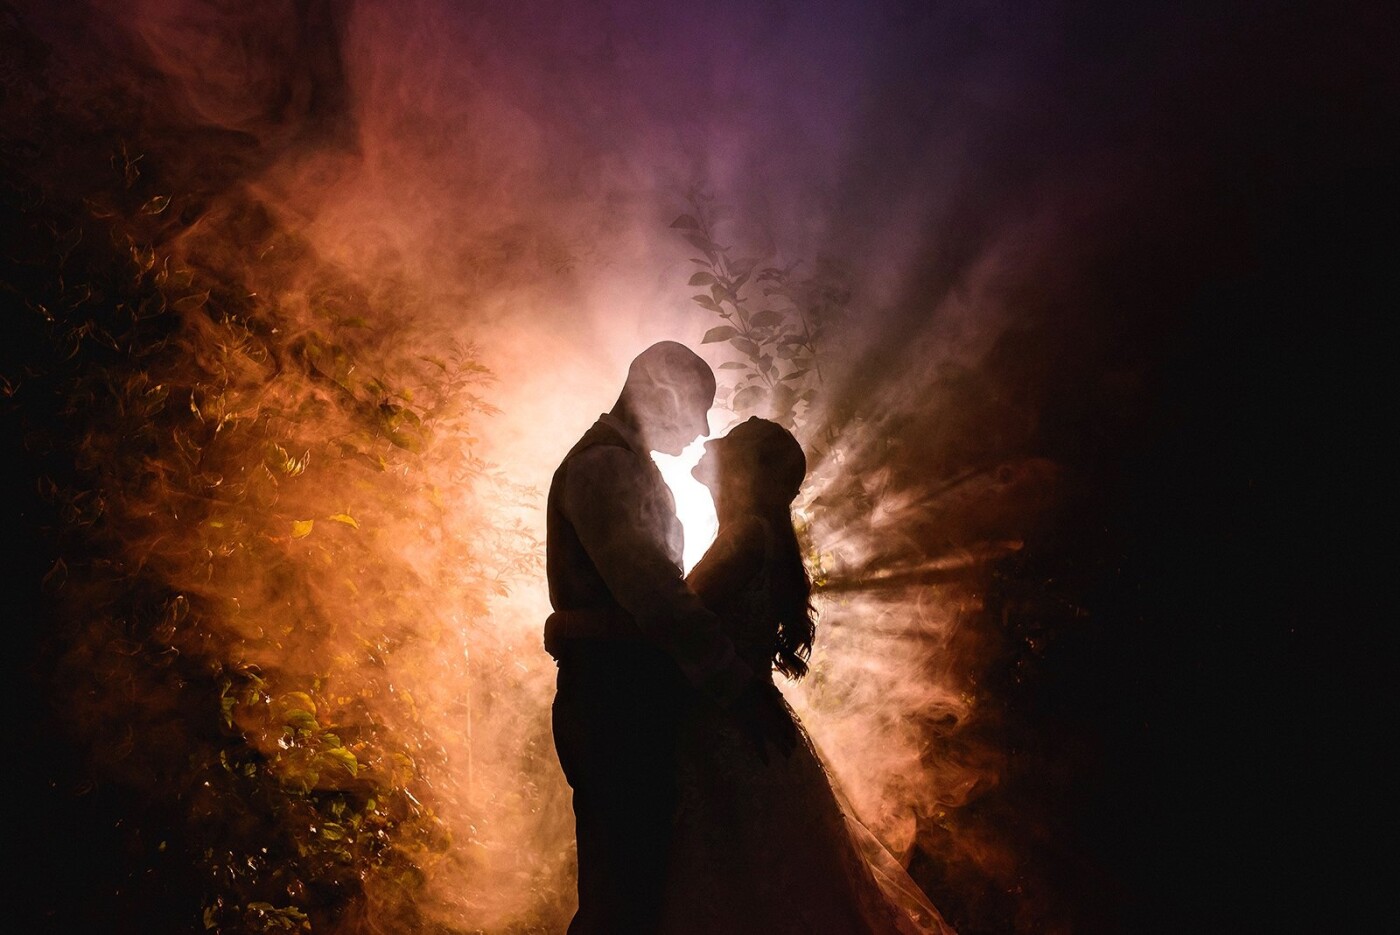 This photograph was taken at Sandhole Oak Barn in Cheshire, UK. The couple are lit by a single gelled speedlight placed behind them and I also set off a smoke bomb behind the couple, in front of the flash, to make the photograph look more dynamic.